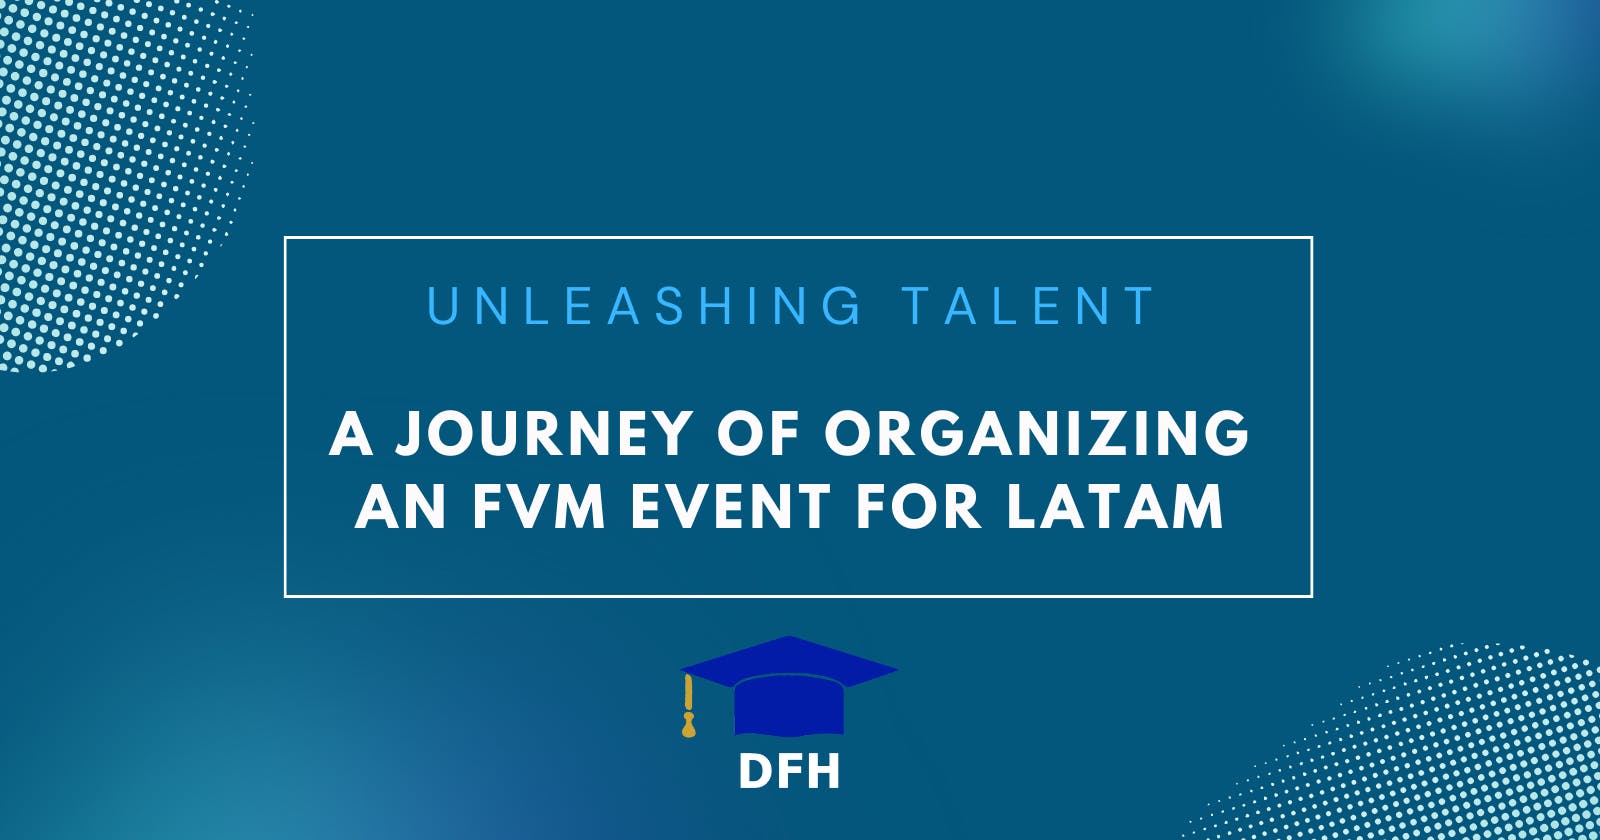 Unleashing Talent: A Journey of Organizing an FVM Event for LATAM